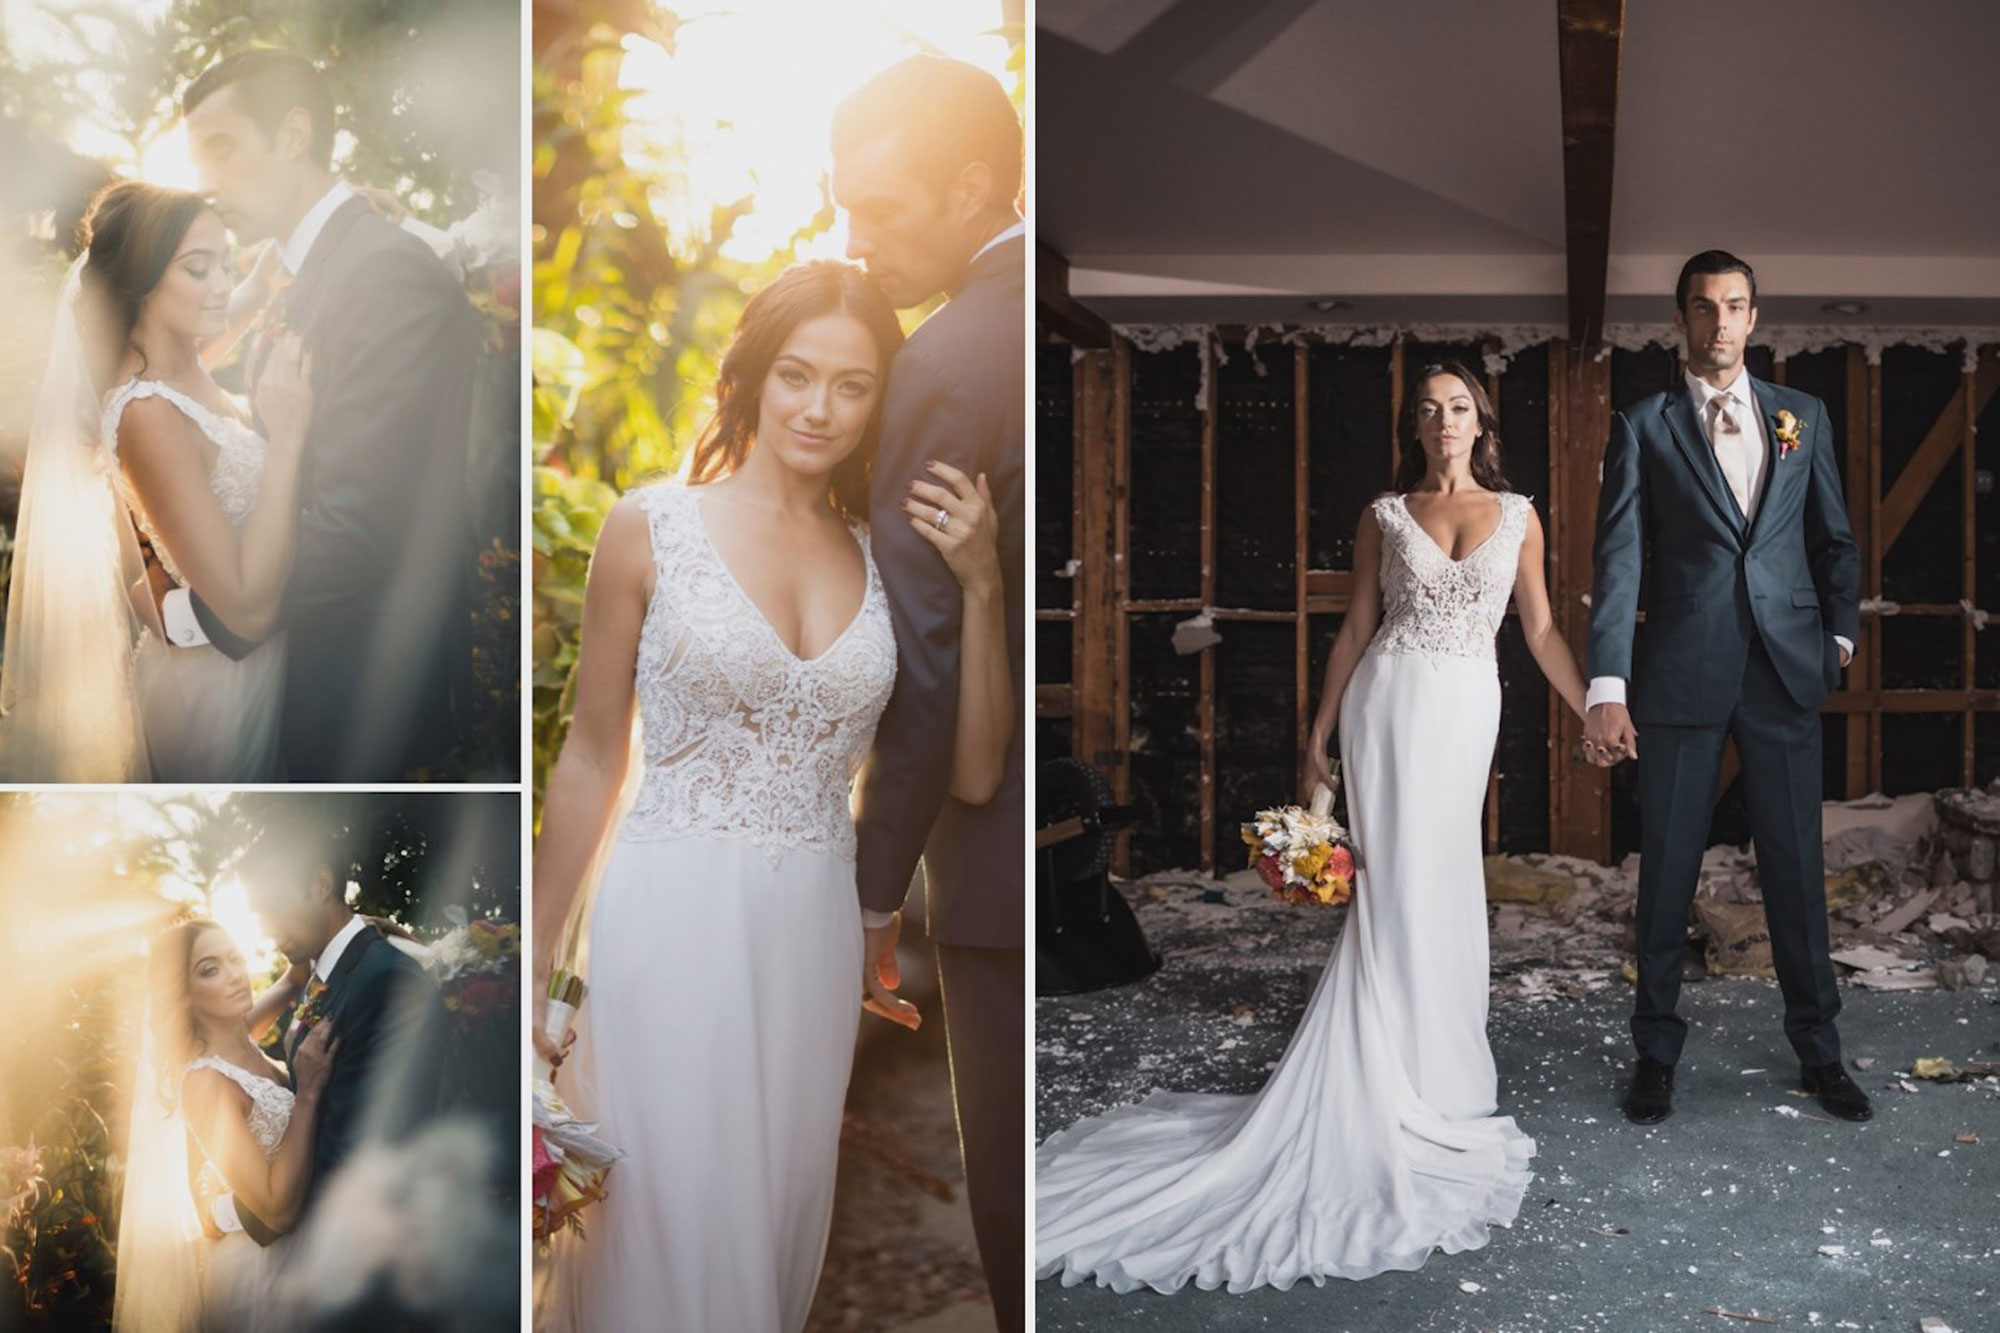 Wedding Workshop Four | Photographing The Couple: Case Study #2: Epic Prints vs. Clusters and Spreads: Cohesion Is Key